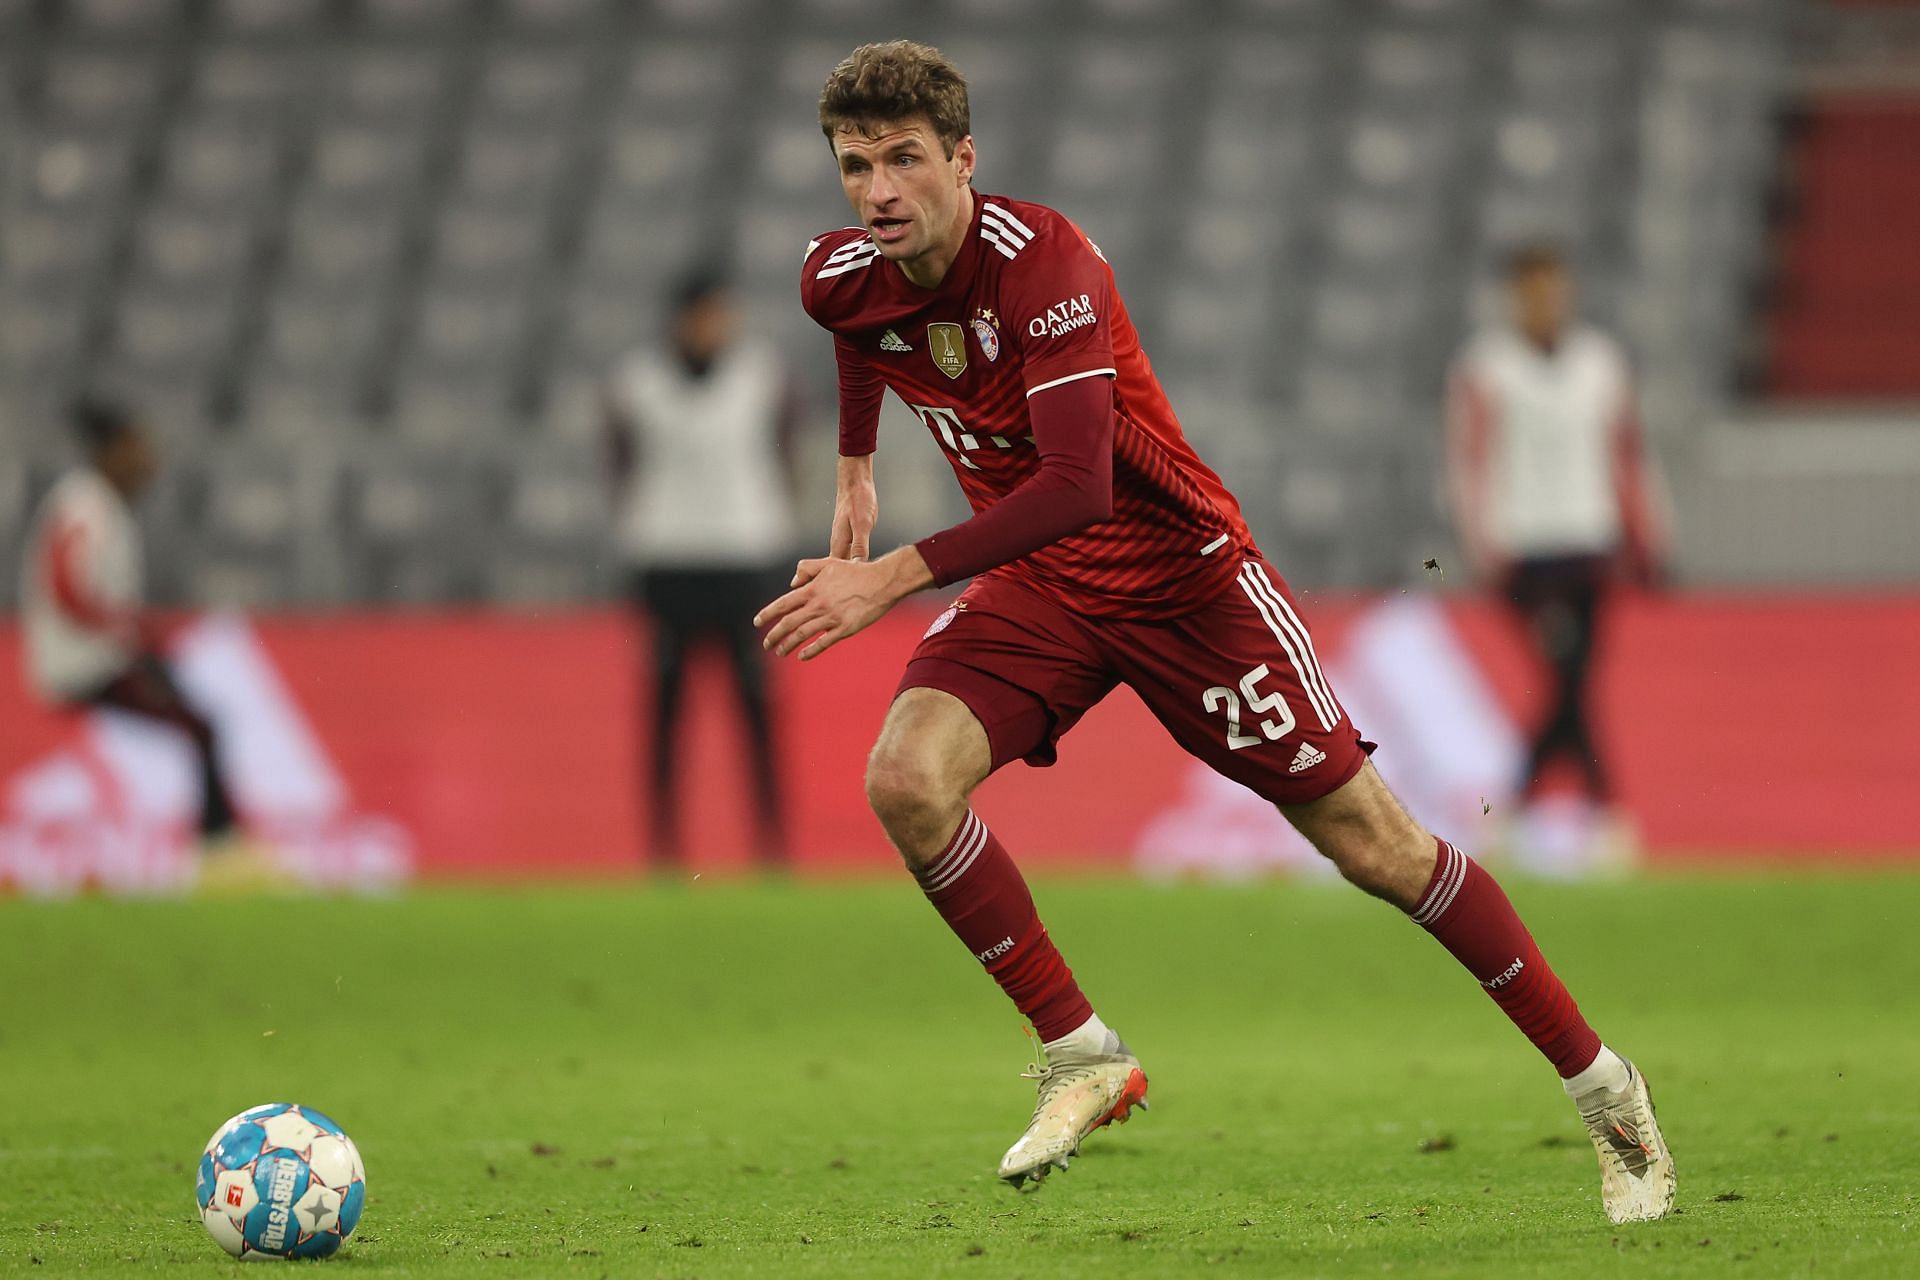 Thomas Muller continued to impress for Germany and Bayern Munich in 2021